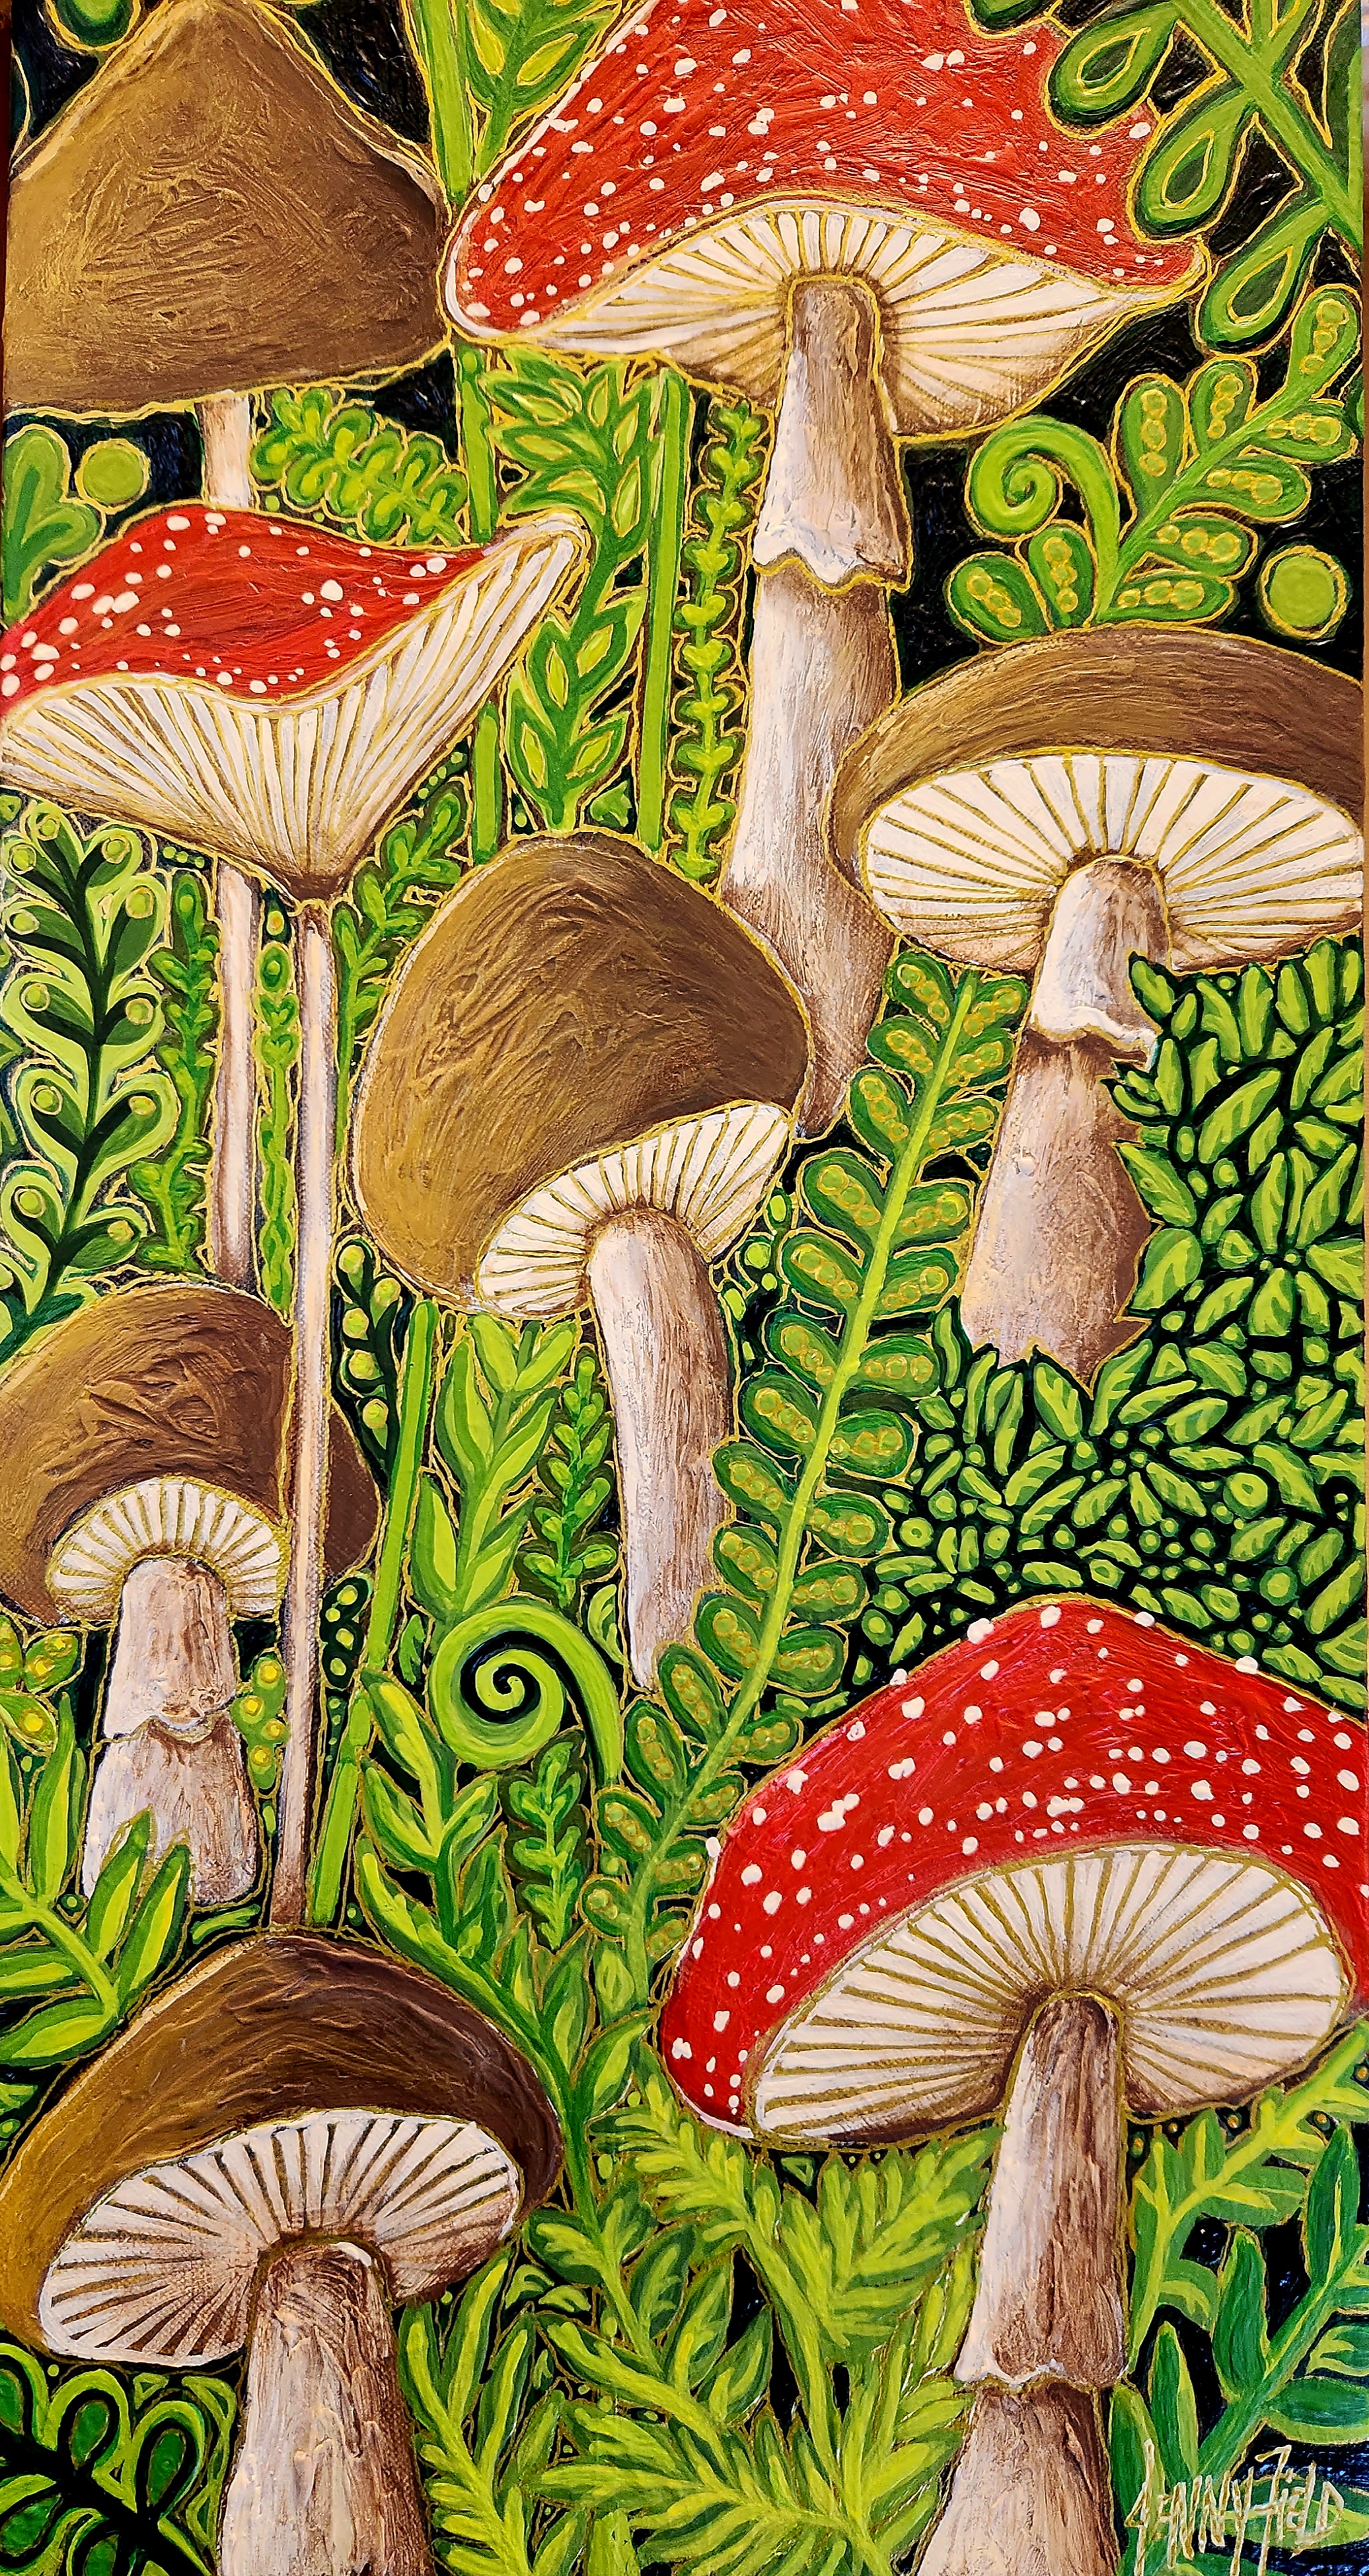 A piece from Jenny Field's "Nature's Alchemy" exhibition. Painting of bright red mushrooms.